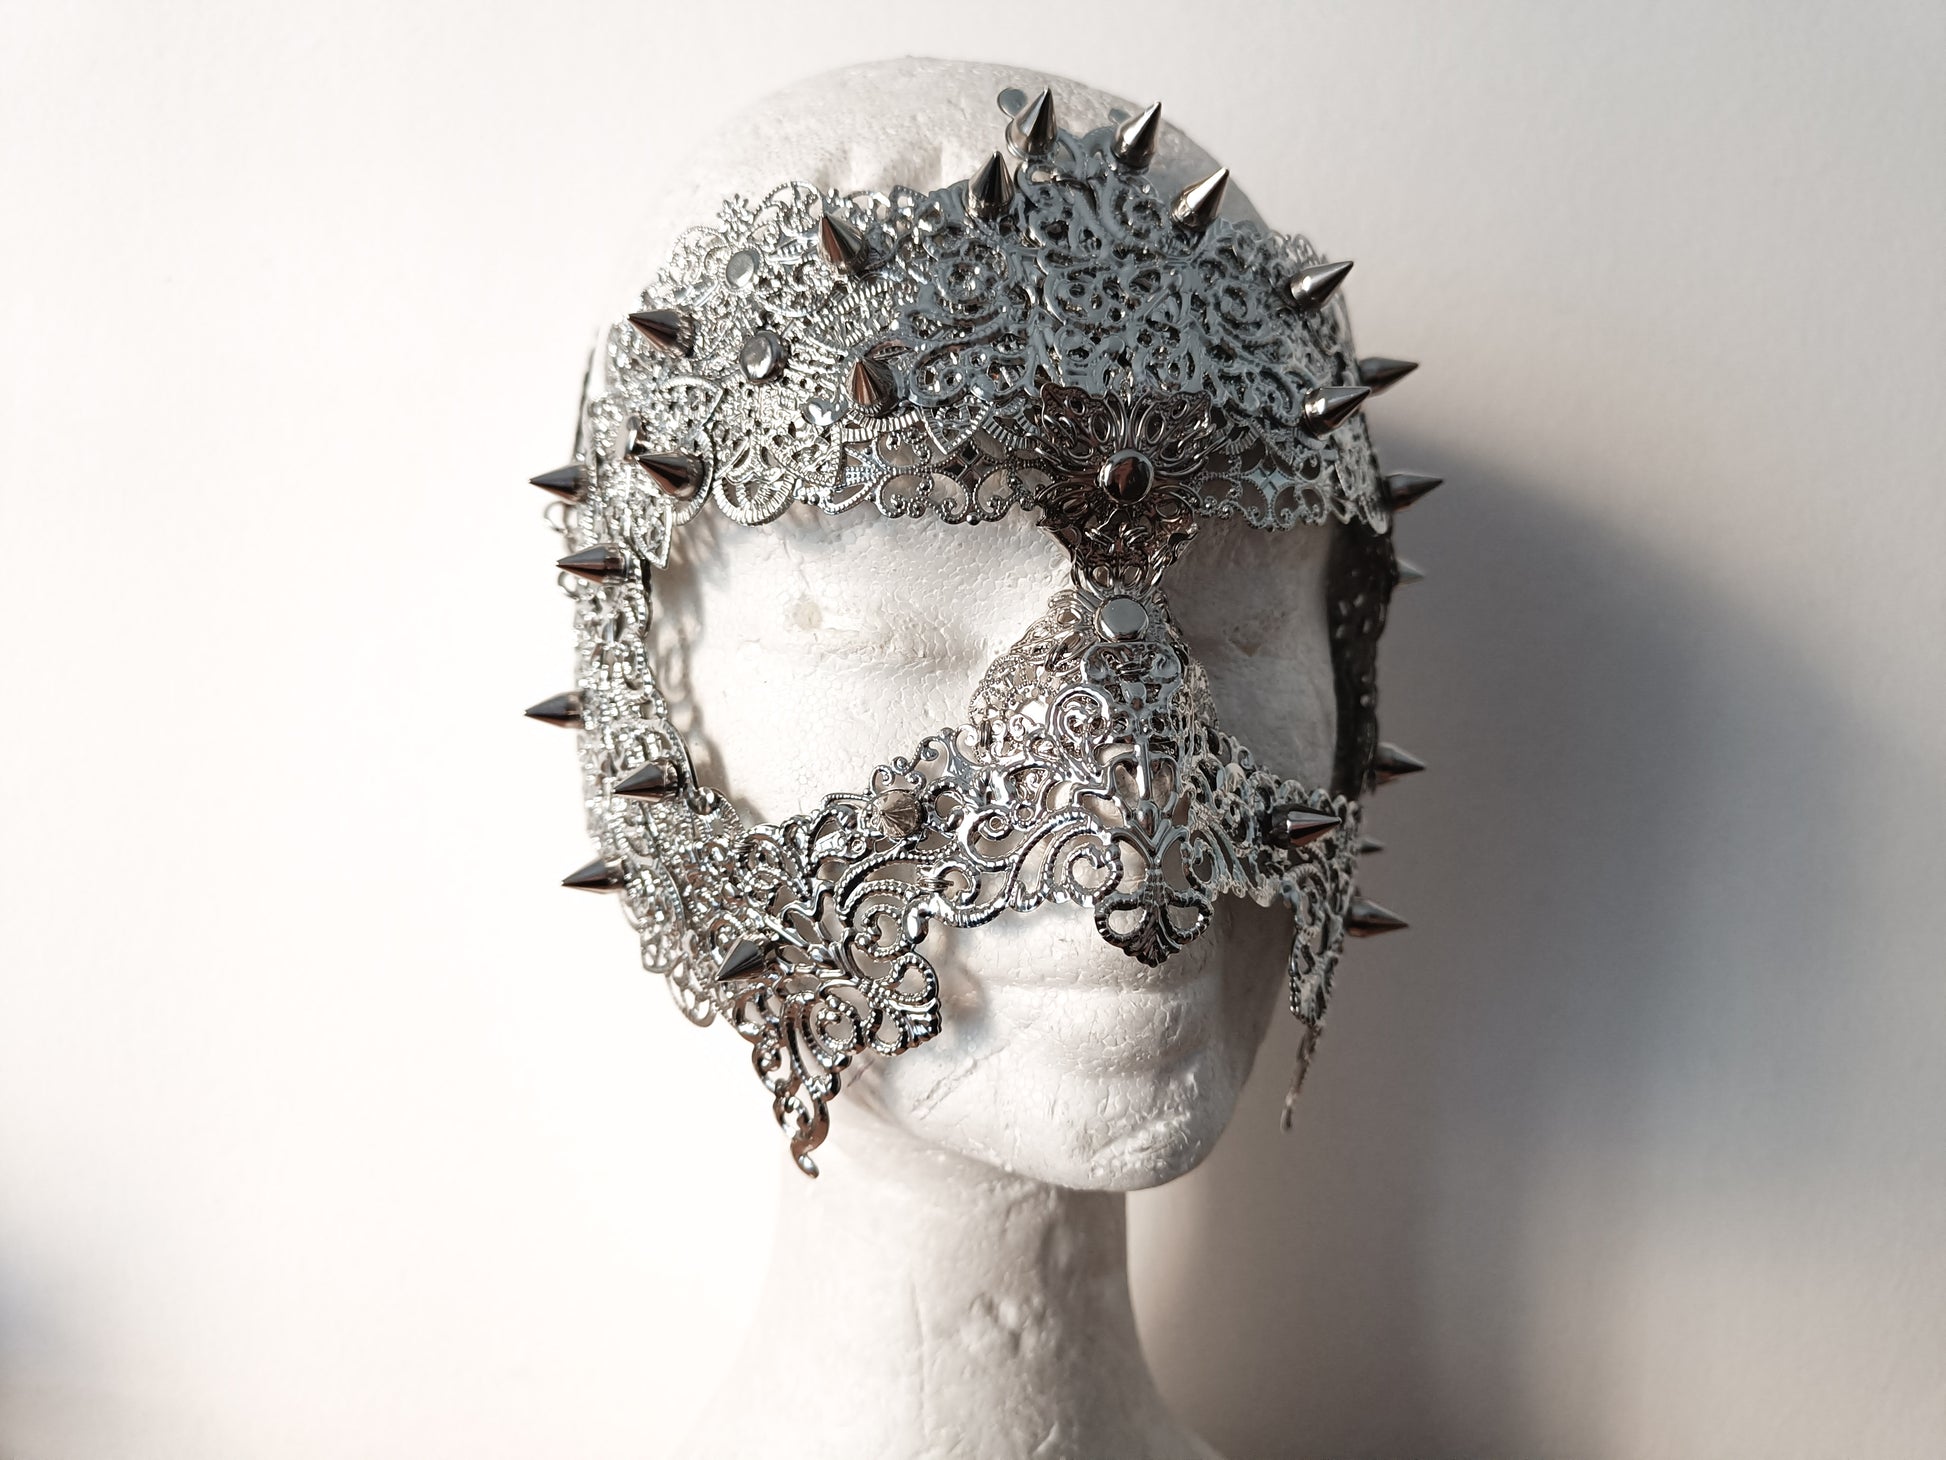 Myril Jewels full-face filigree mask adorned with studs, embodying punk and neo-gothic style. This piece is a statement of dark-avantgarde fashion, perfect for Halloween, rave parties, or as a dramatic goth girlfriend gift.